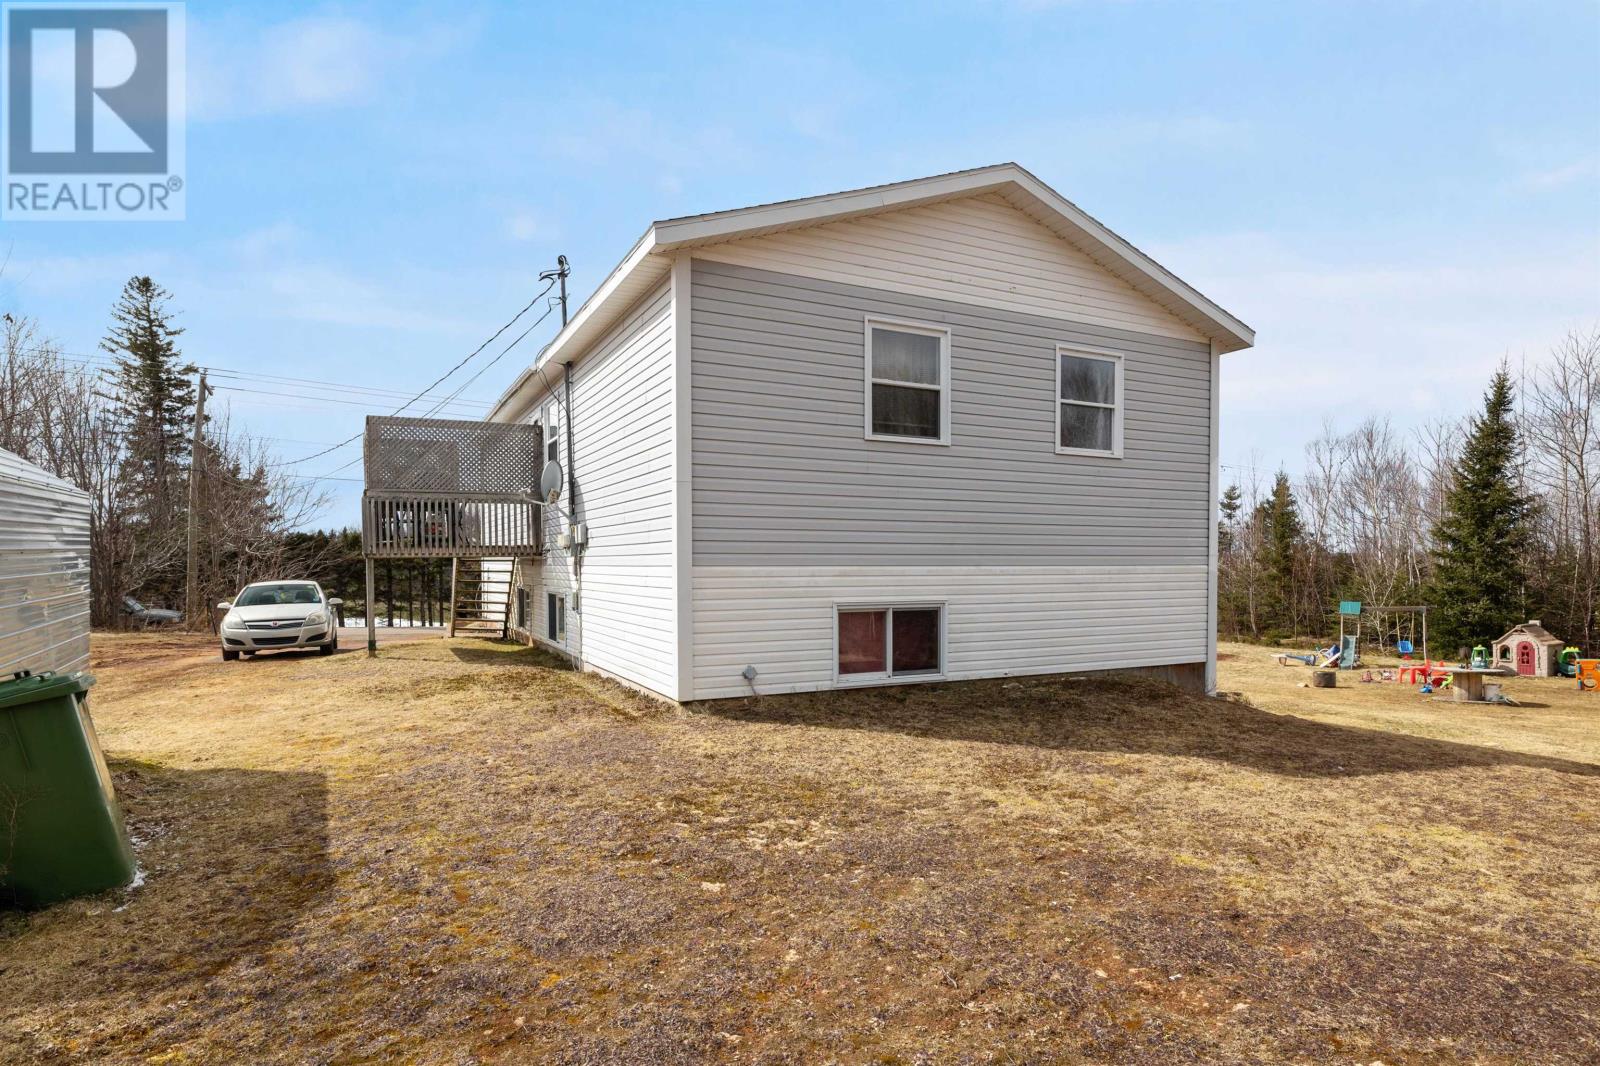 5819/5821 Campbell Road, Victoria Cross, Montague, Prince Edward Island  C0A 1R0 - Photo 17 - 202405401